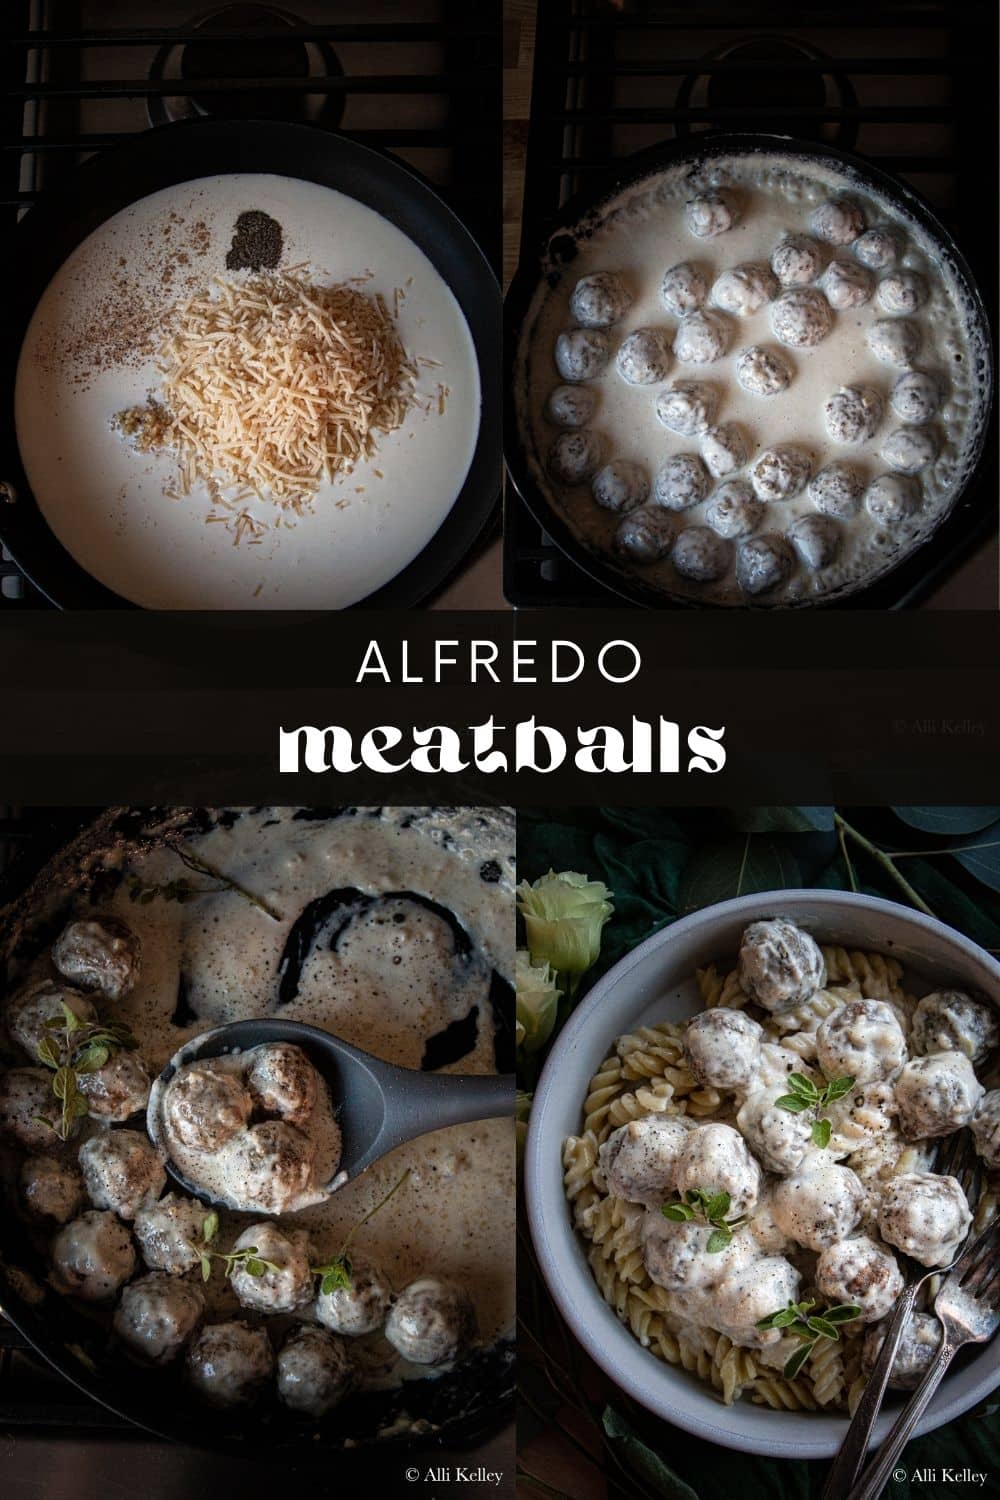 Tender meatballs smothered in a creamy and delicious Alfredo sauce - what could be better?! My alfredo meatballs recipe is the perfect dinner for any occasion. Meatballs with alfredo sauce are super quick and easy, yet oh so delicious. It's a winning combination that everyone will enjoy!